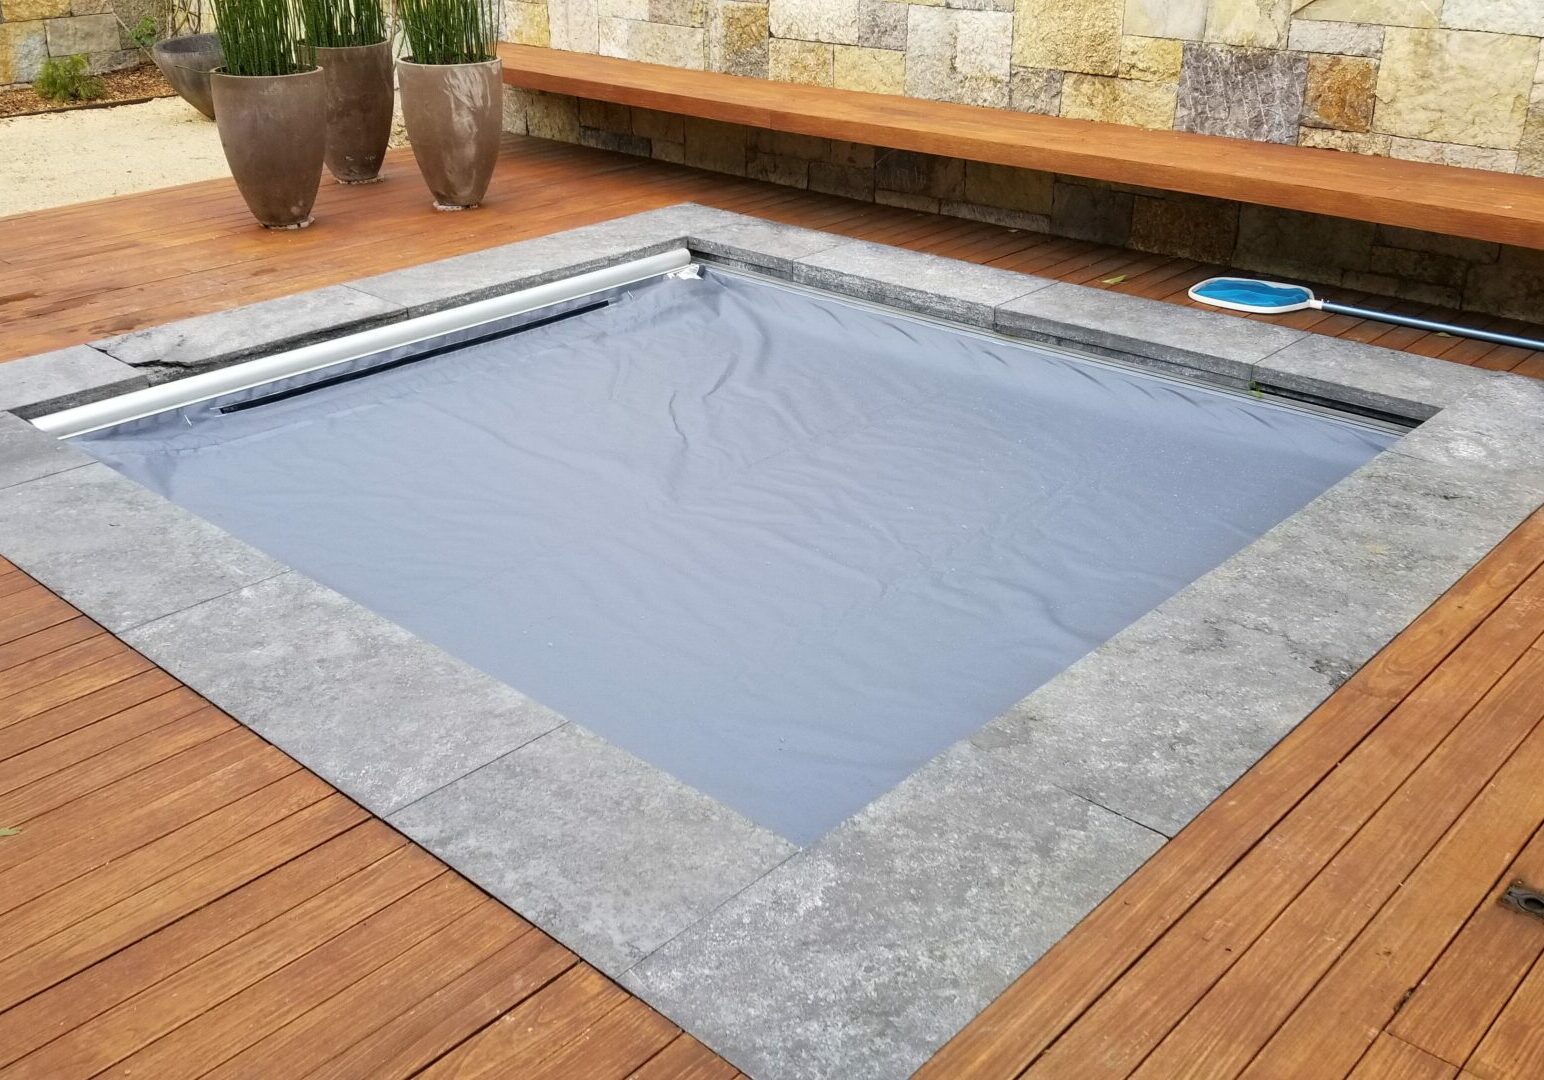 Small gray pool cover